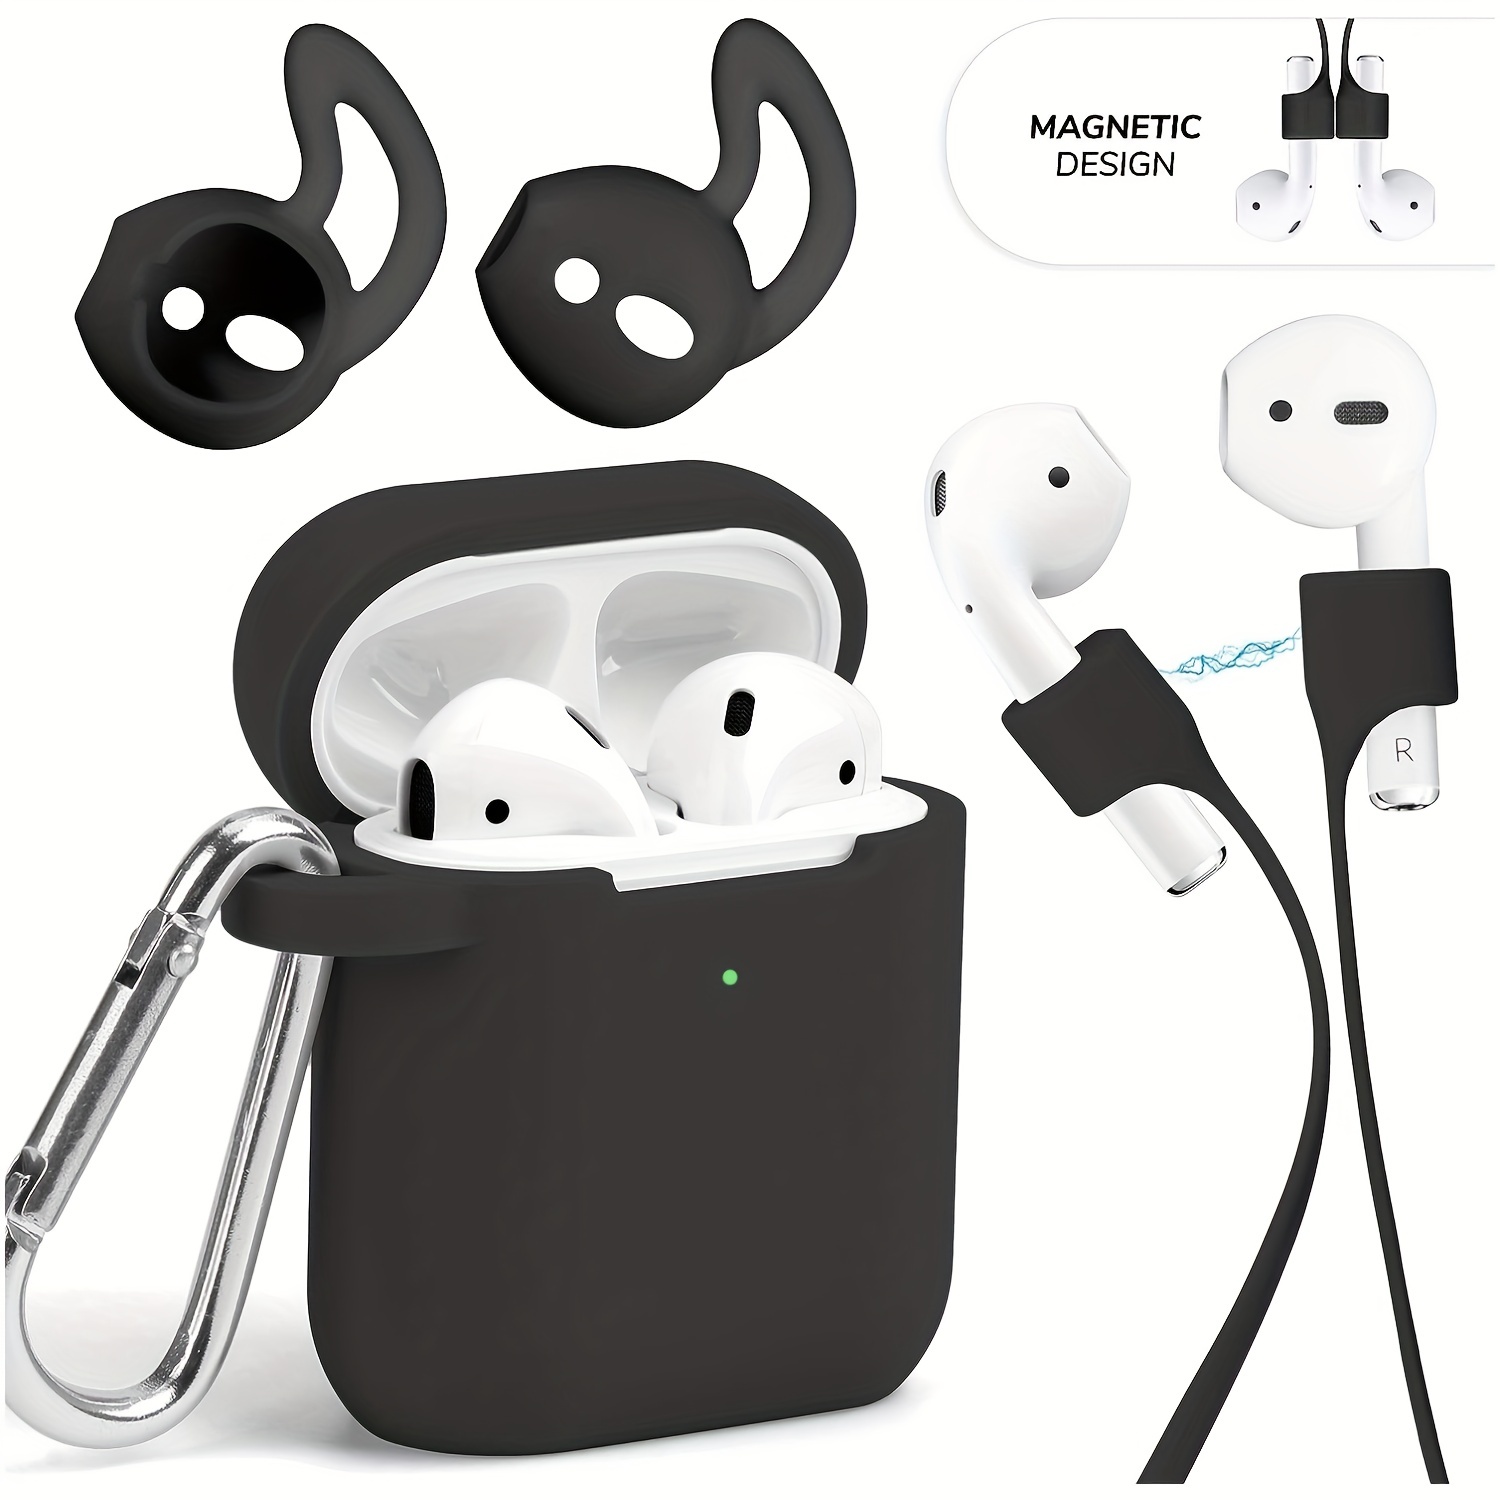  Compatible with AirPods Case Cover with Keychain, Luxury  Full-Body Hard Shell Airpods Protective Cover Case Designed for AirPods 2 &  1, for AirPods Wireless Charging Case : Electronics